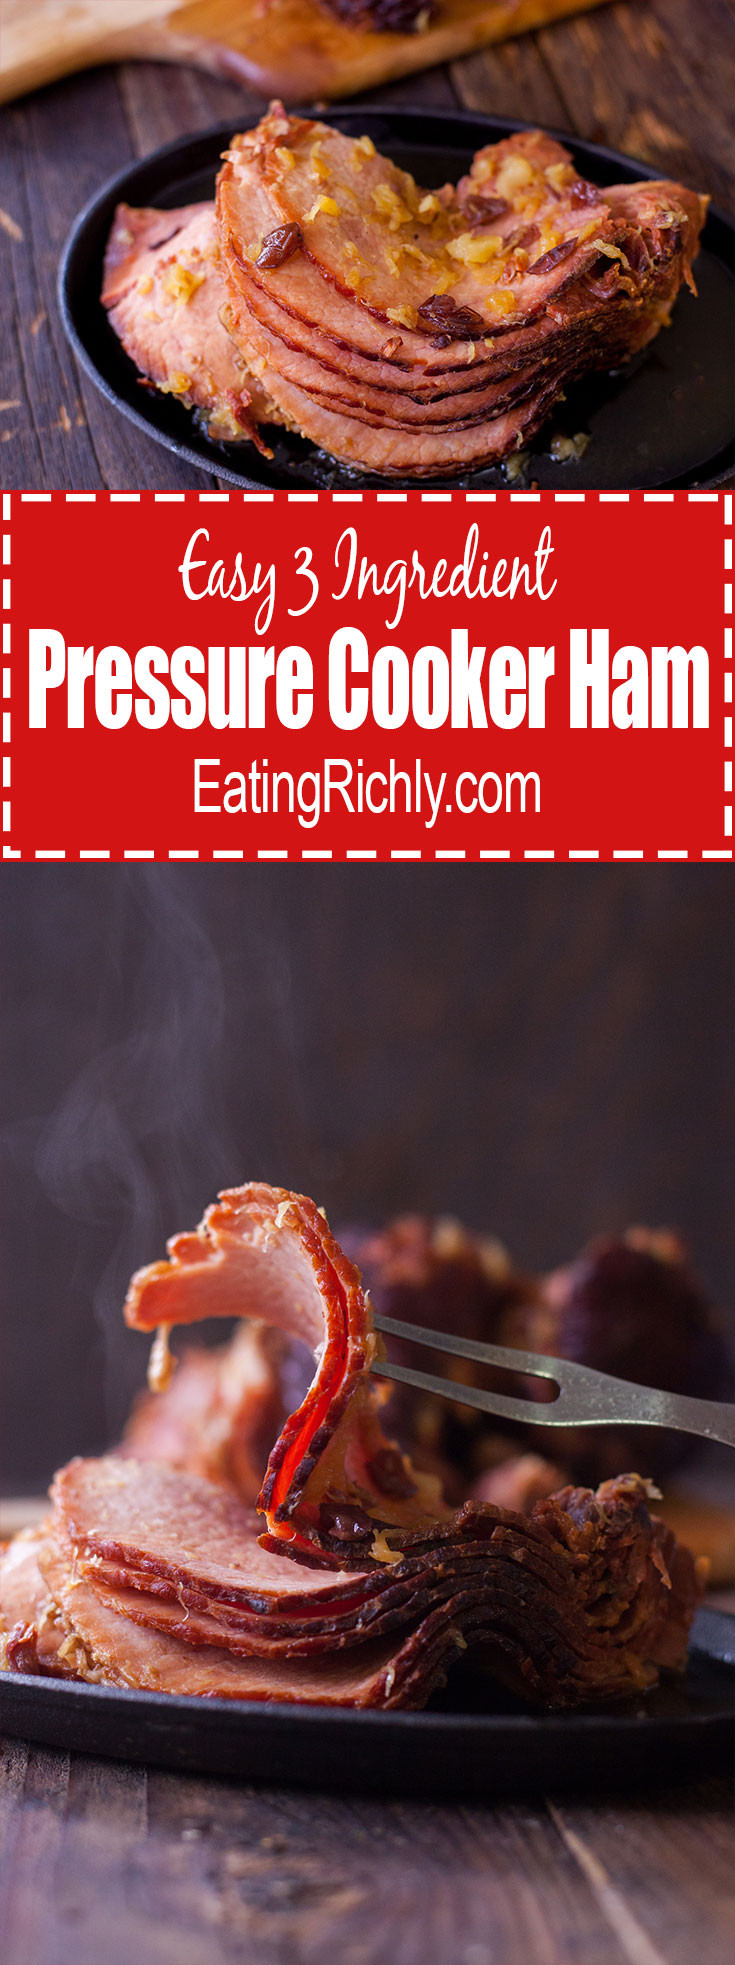 Pressure Cooked Ham Recipes
 Pressure Cooker Ham with Just 3 Ingre nts Eating Richly